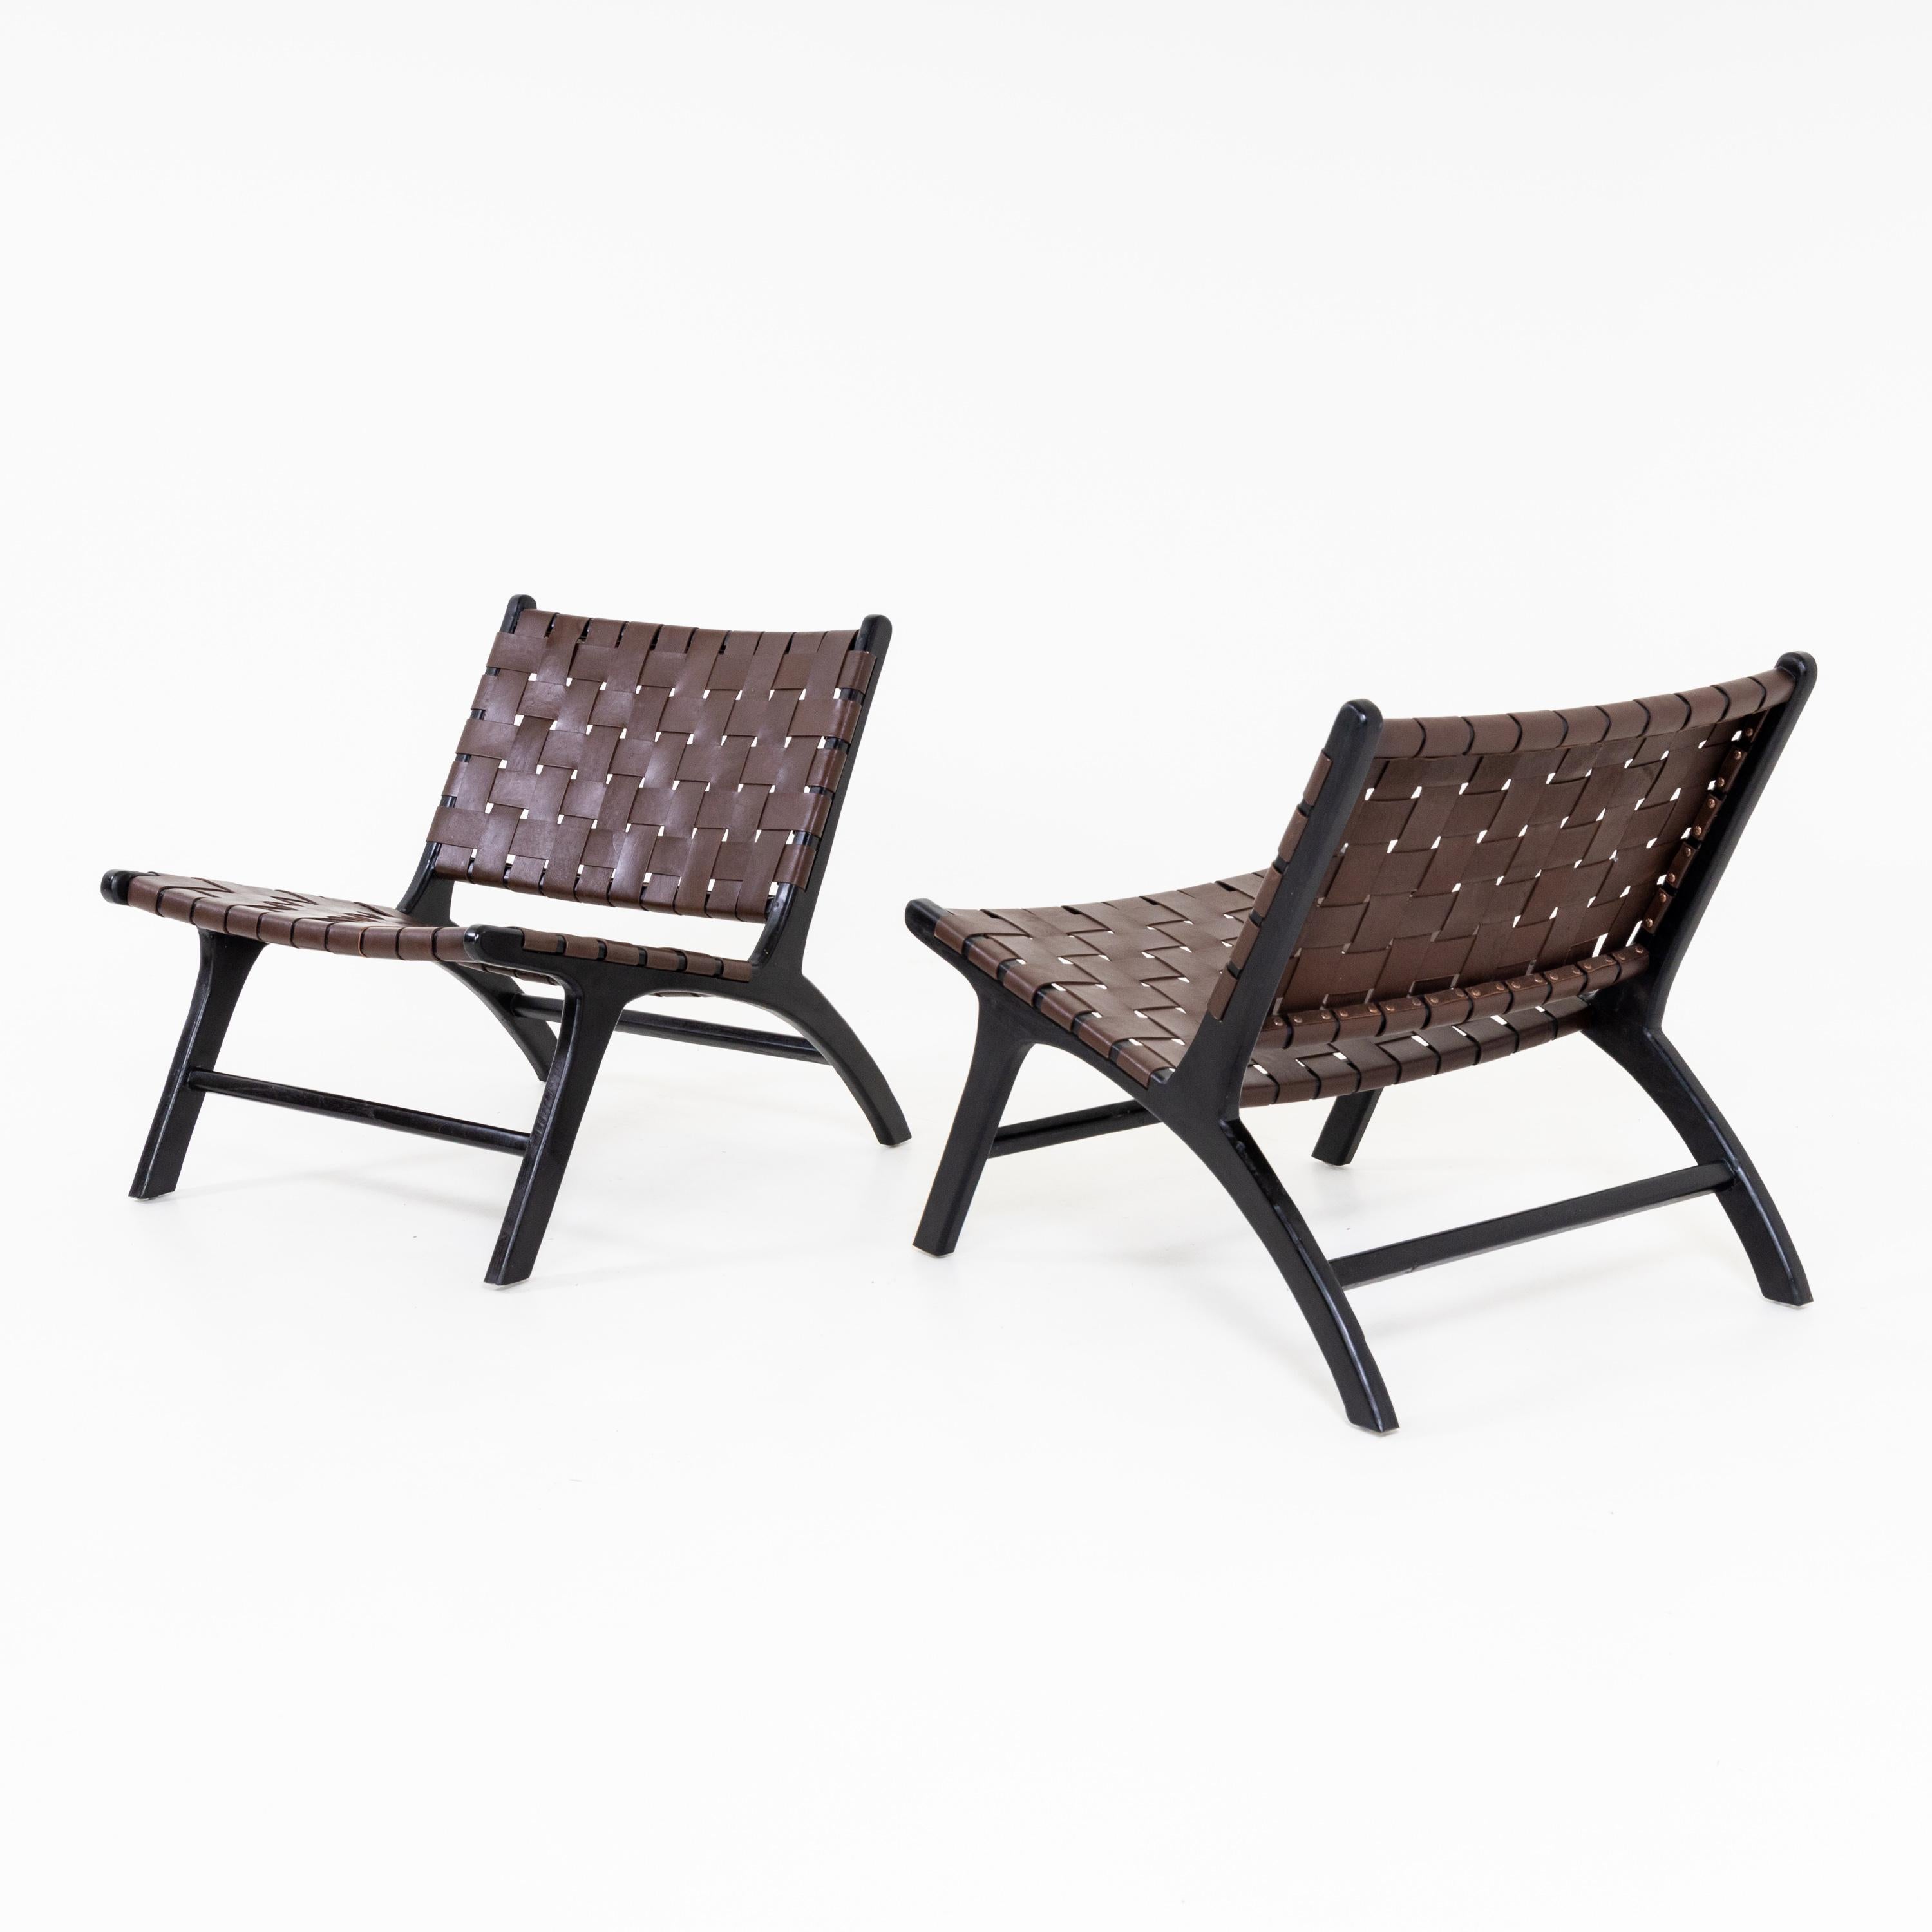 Belgian Olivier de Schrijver, Lounge Chairs with Leather Cover, 20th Century